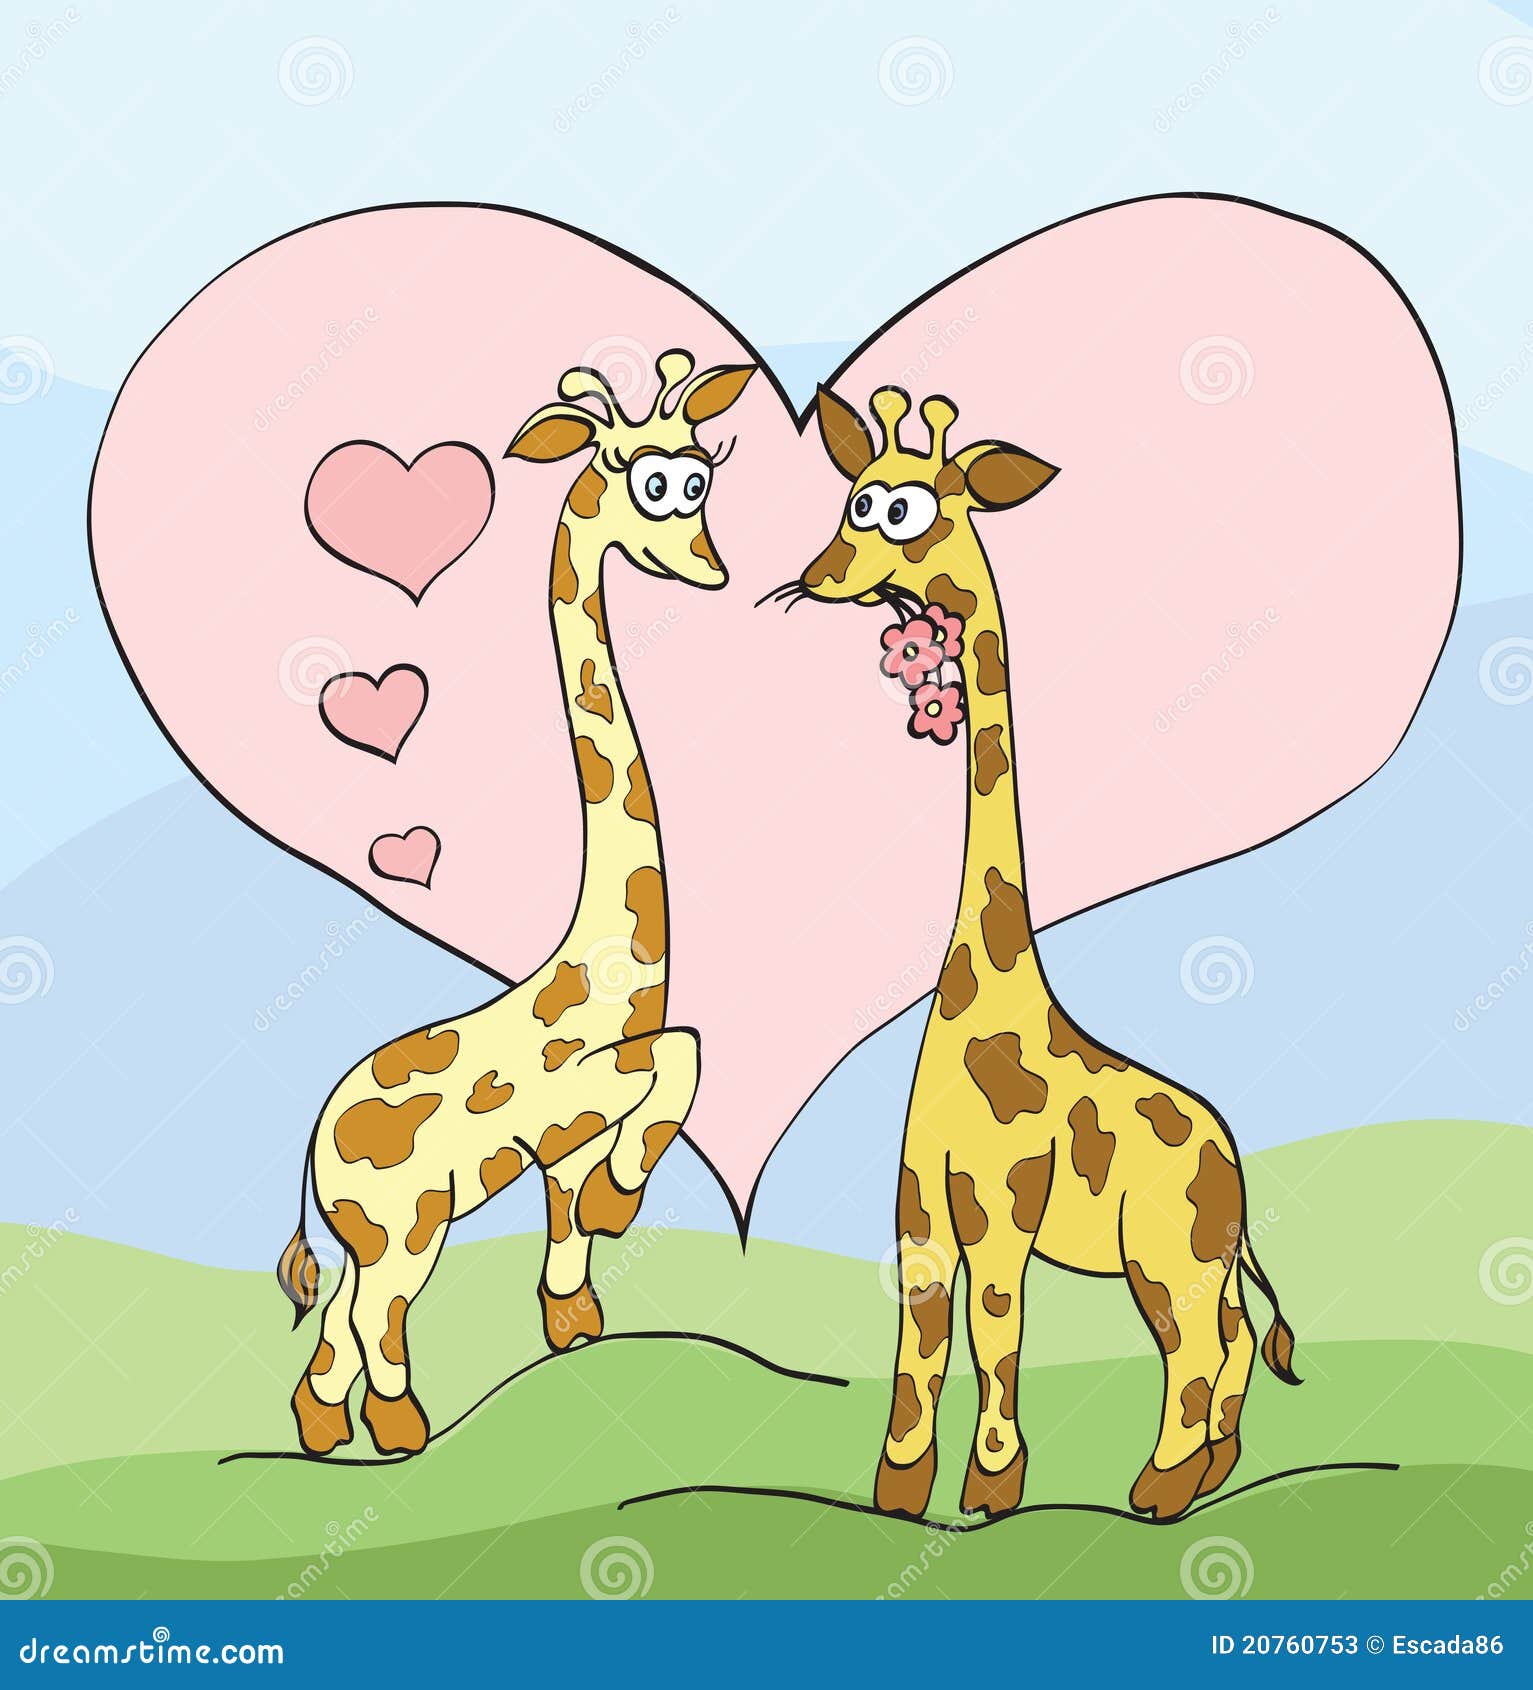 two giraffes with hearts